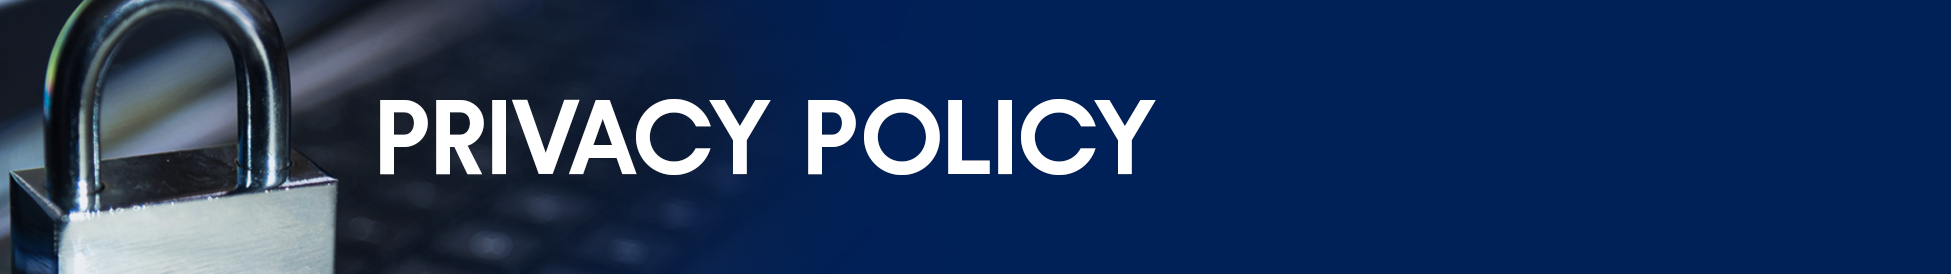 privacy policy banner final